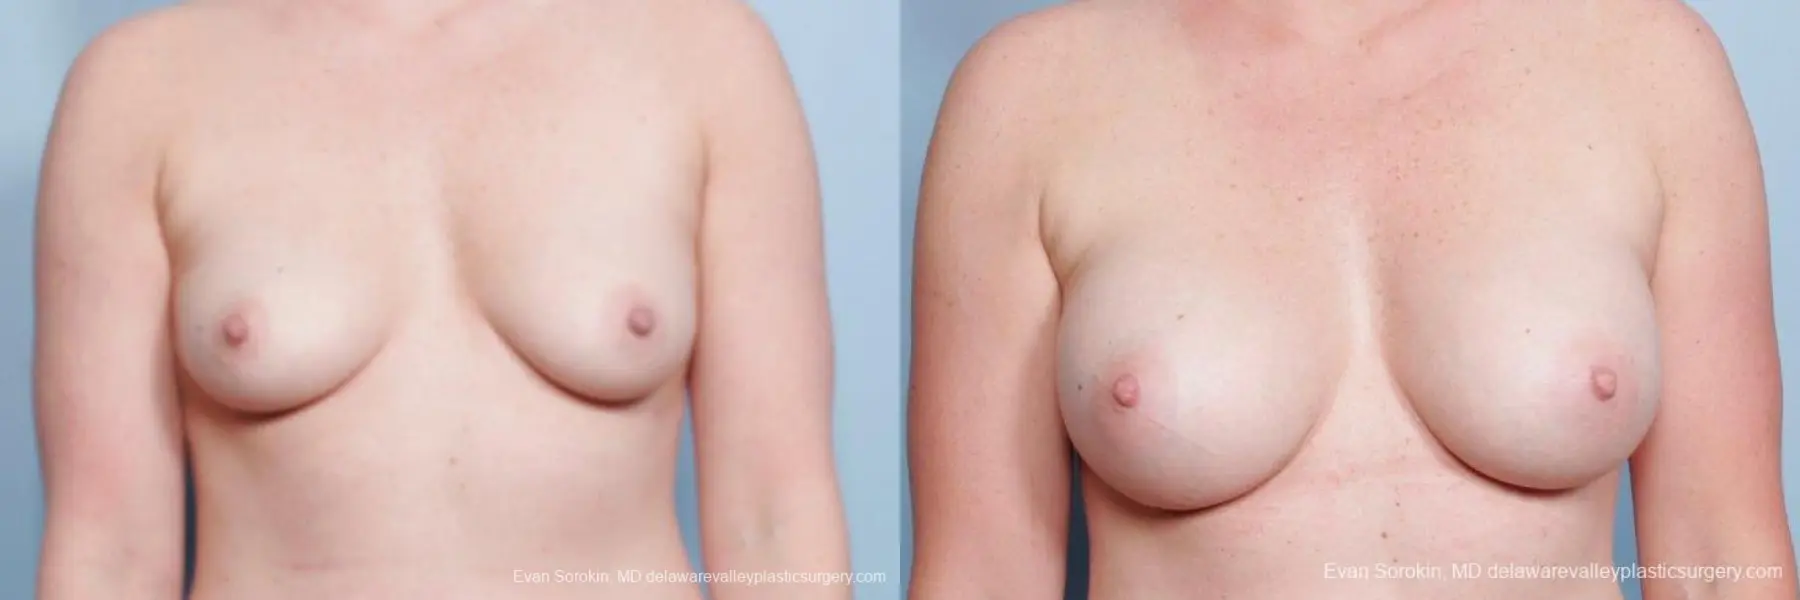 Philadelphia Breast Augmentation 8658 - Before and After 1